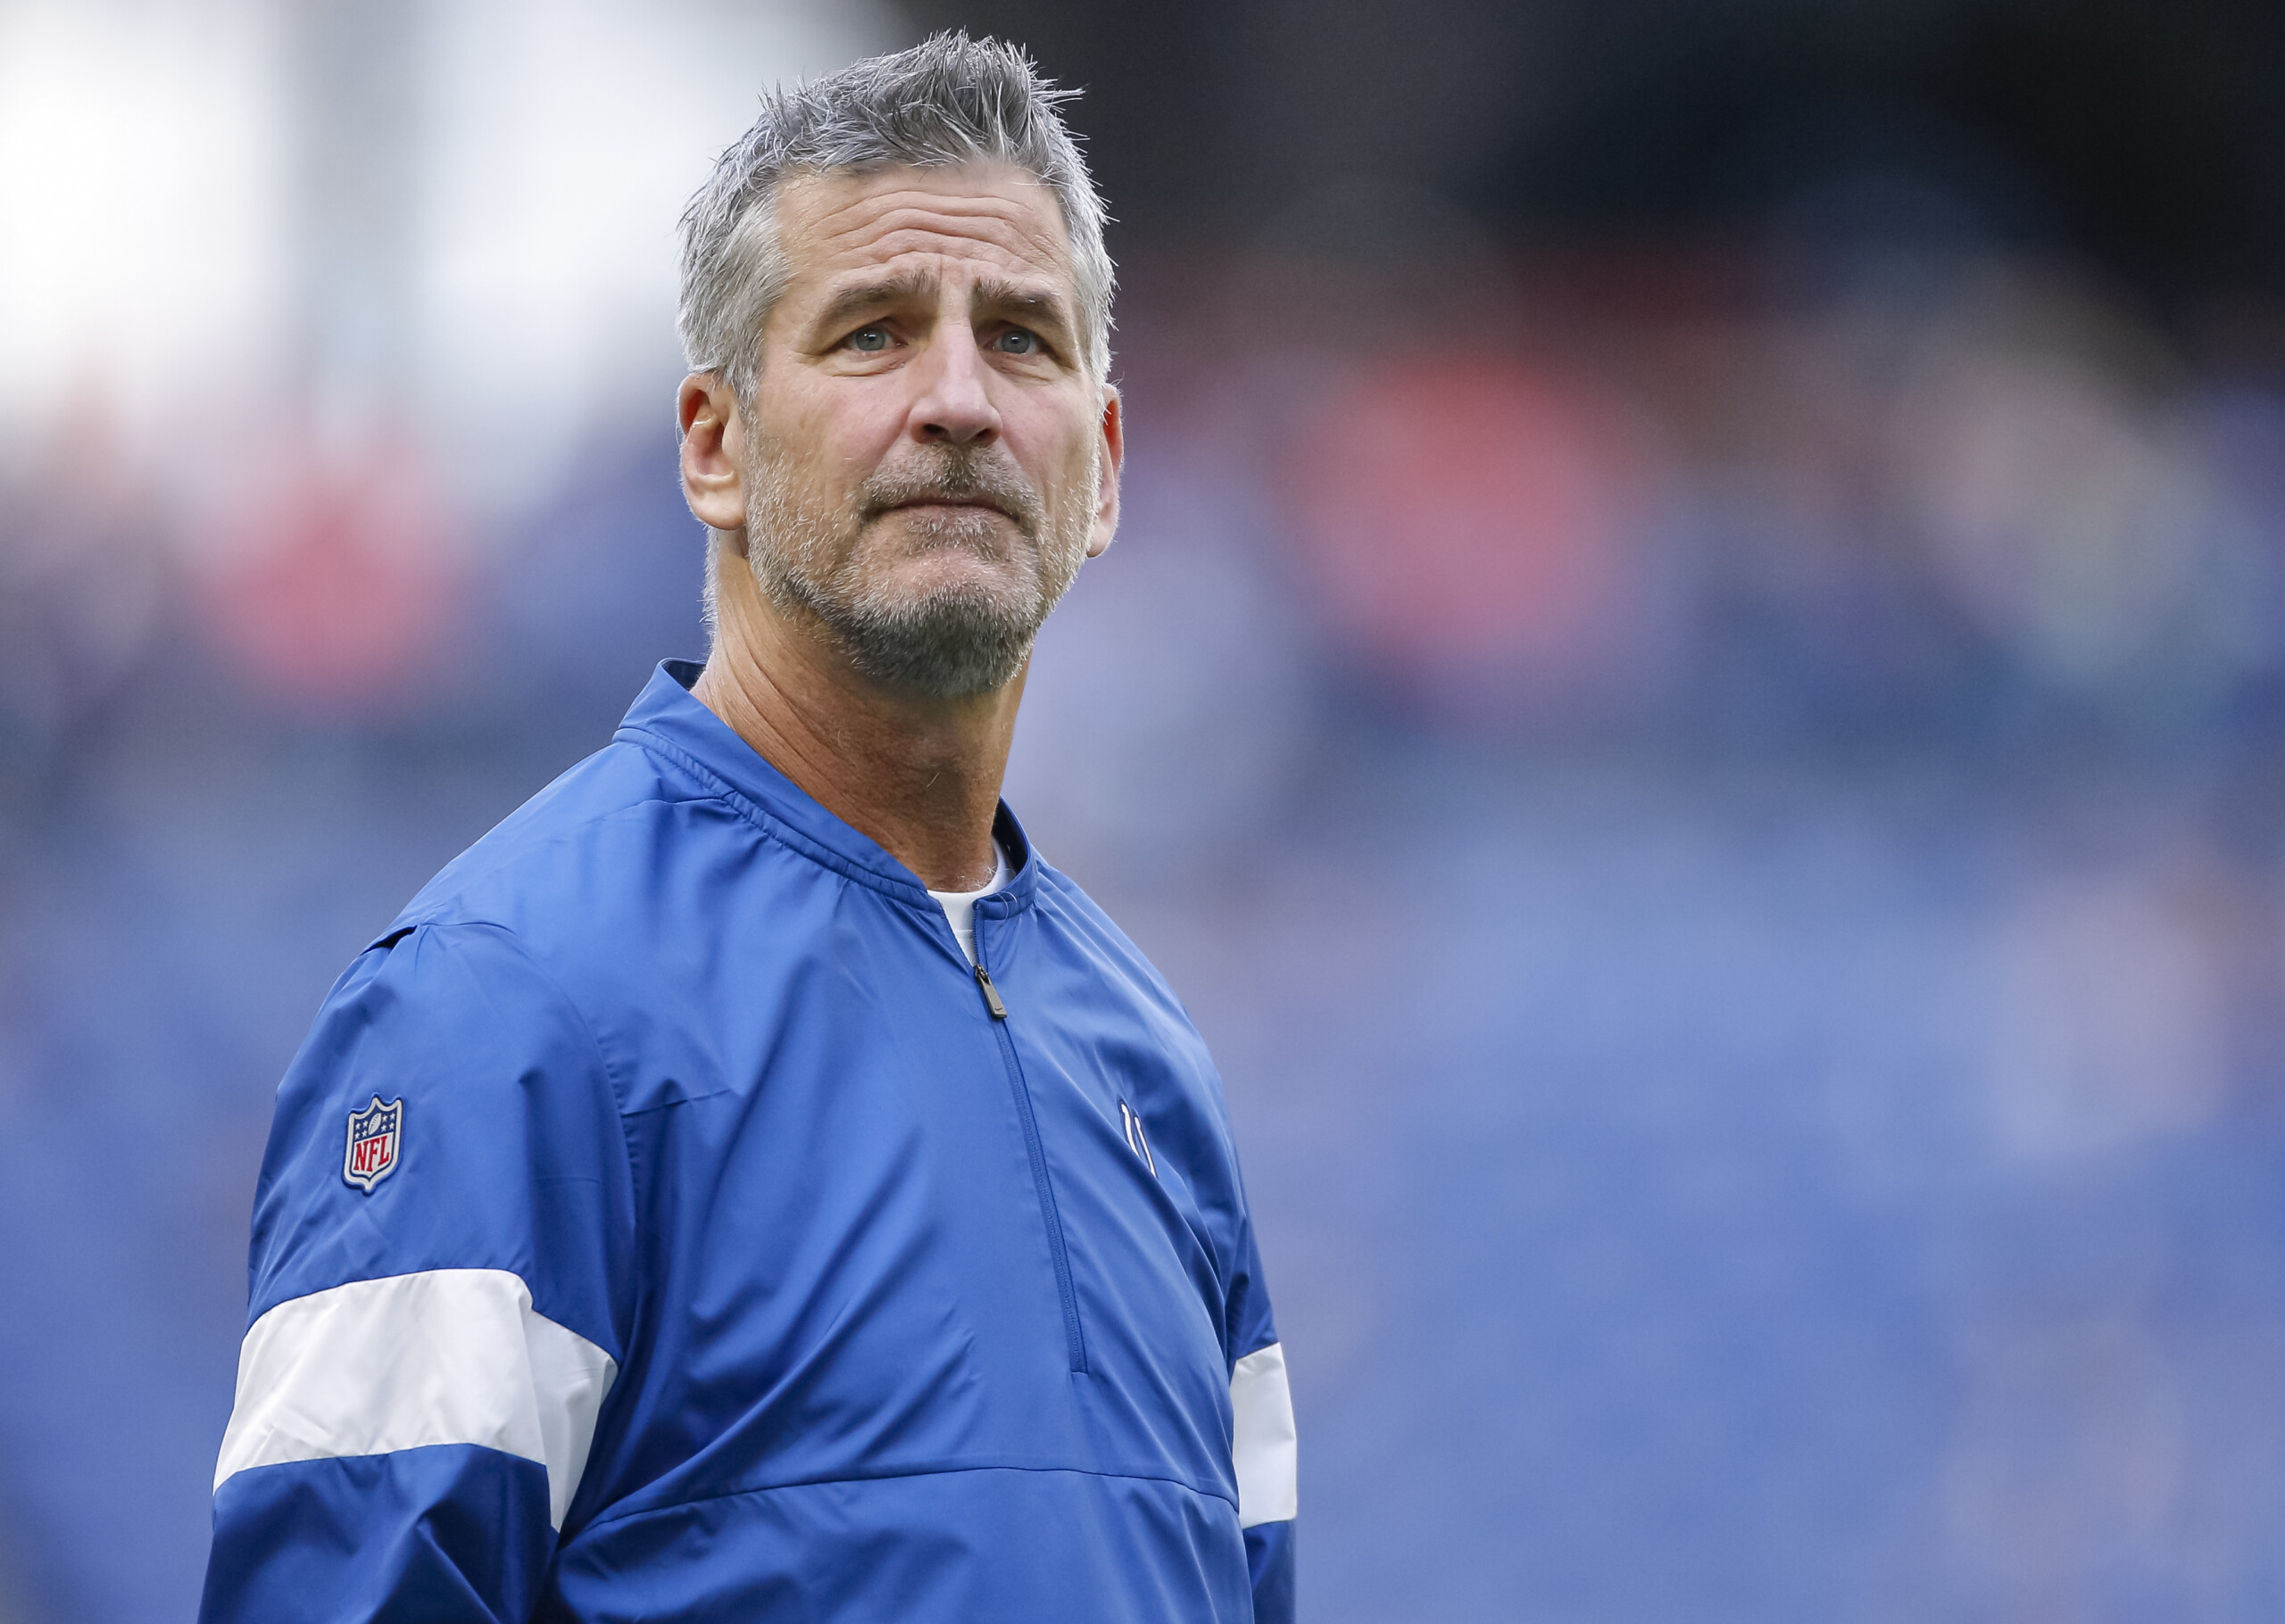 Carolina Panthers hire Frank Reich as new head coach - WISH-TV